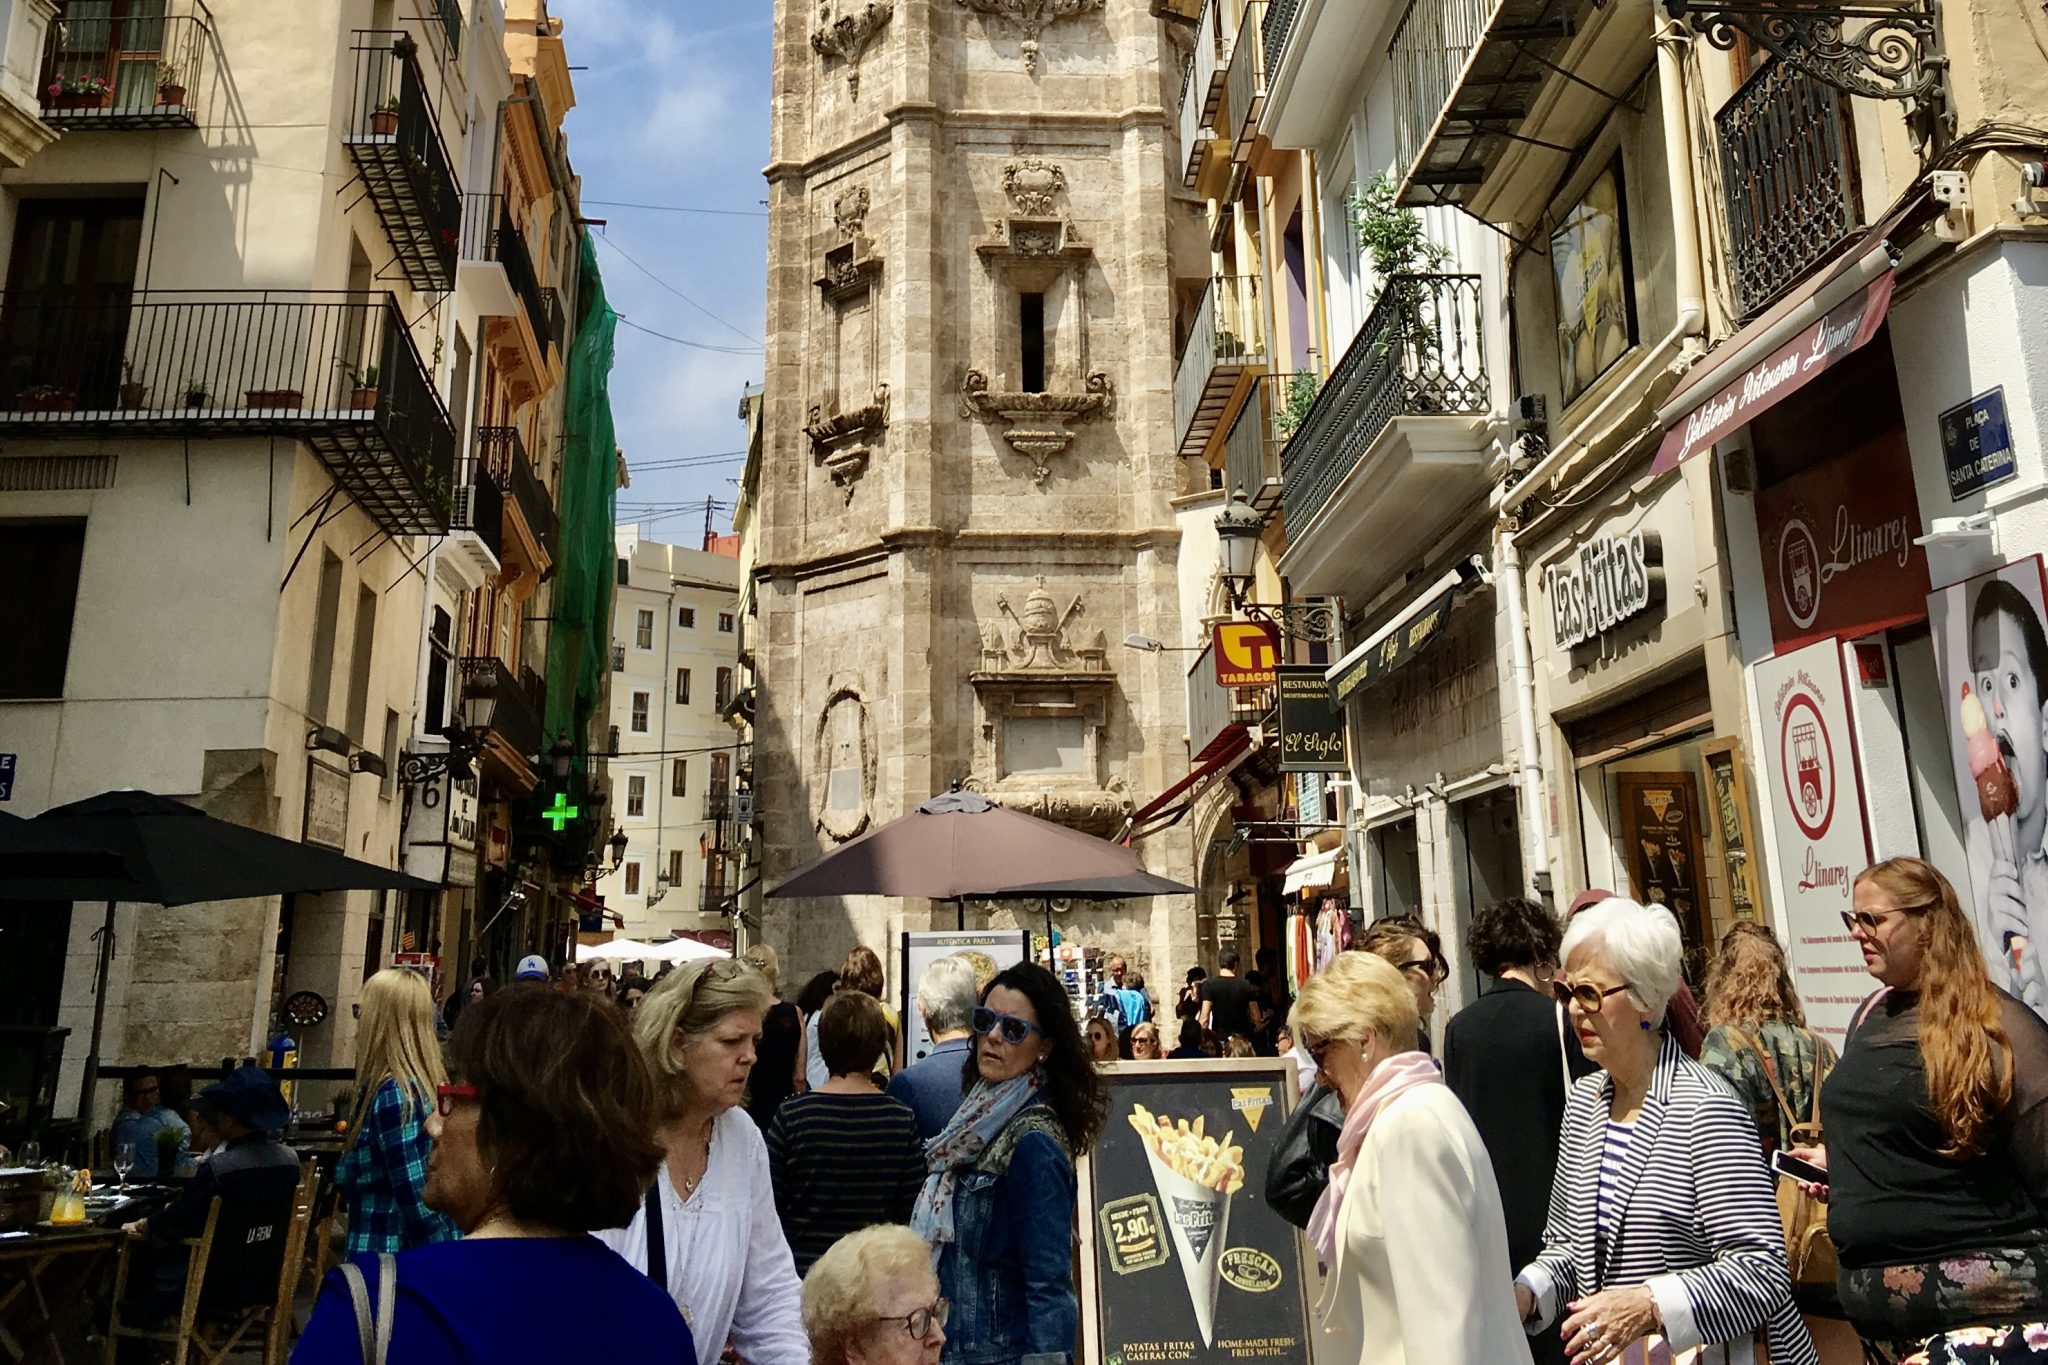 Pedestrians on a crowded street in Valencia, Spain in 2019. Spain is aiming to reach two-thirds of its 2019 numbers in Q4 this year. 